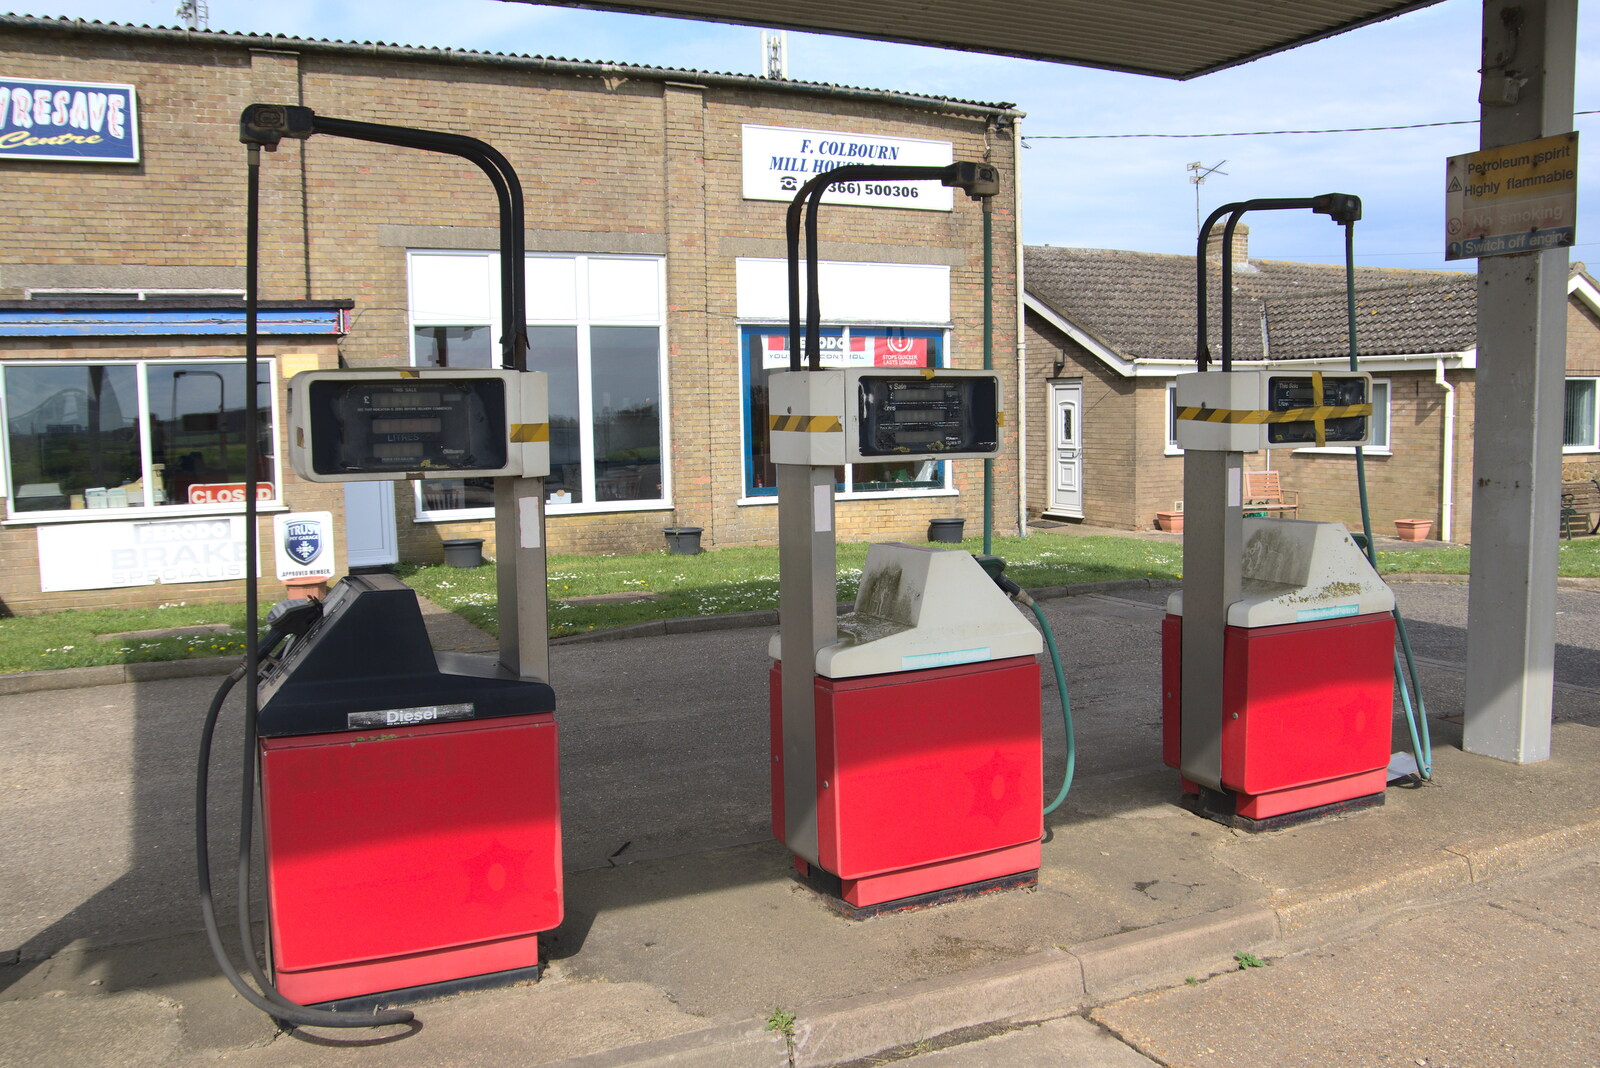 Derelict petrol pumps from A Vaccination Afternoon, Swaffham, Norfolk - 9th May 2021